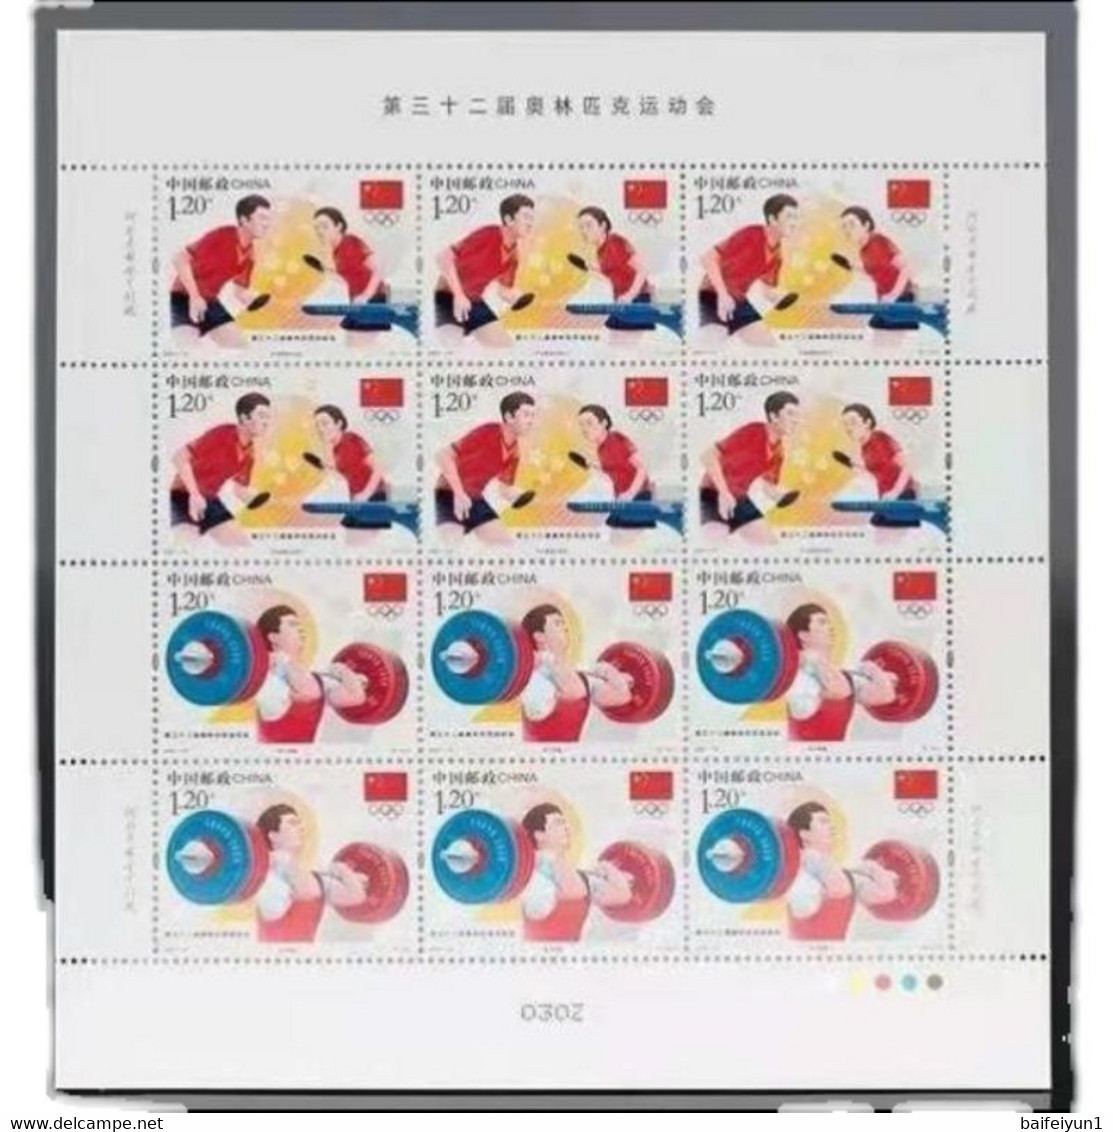 China 2021-14 The 2020 Tokyo Olympic Games Stamps 2v Table Tennis Full Sheet - Summer 2020: Tokyo